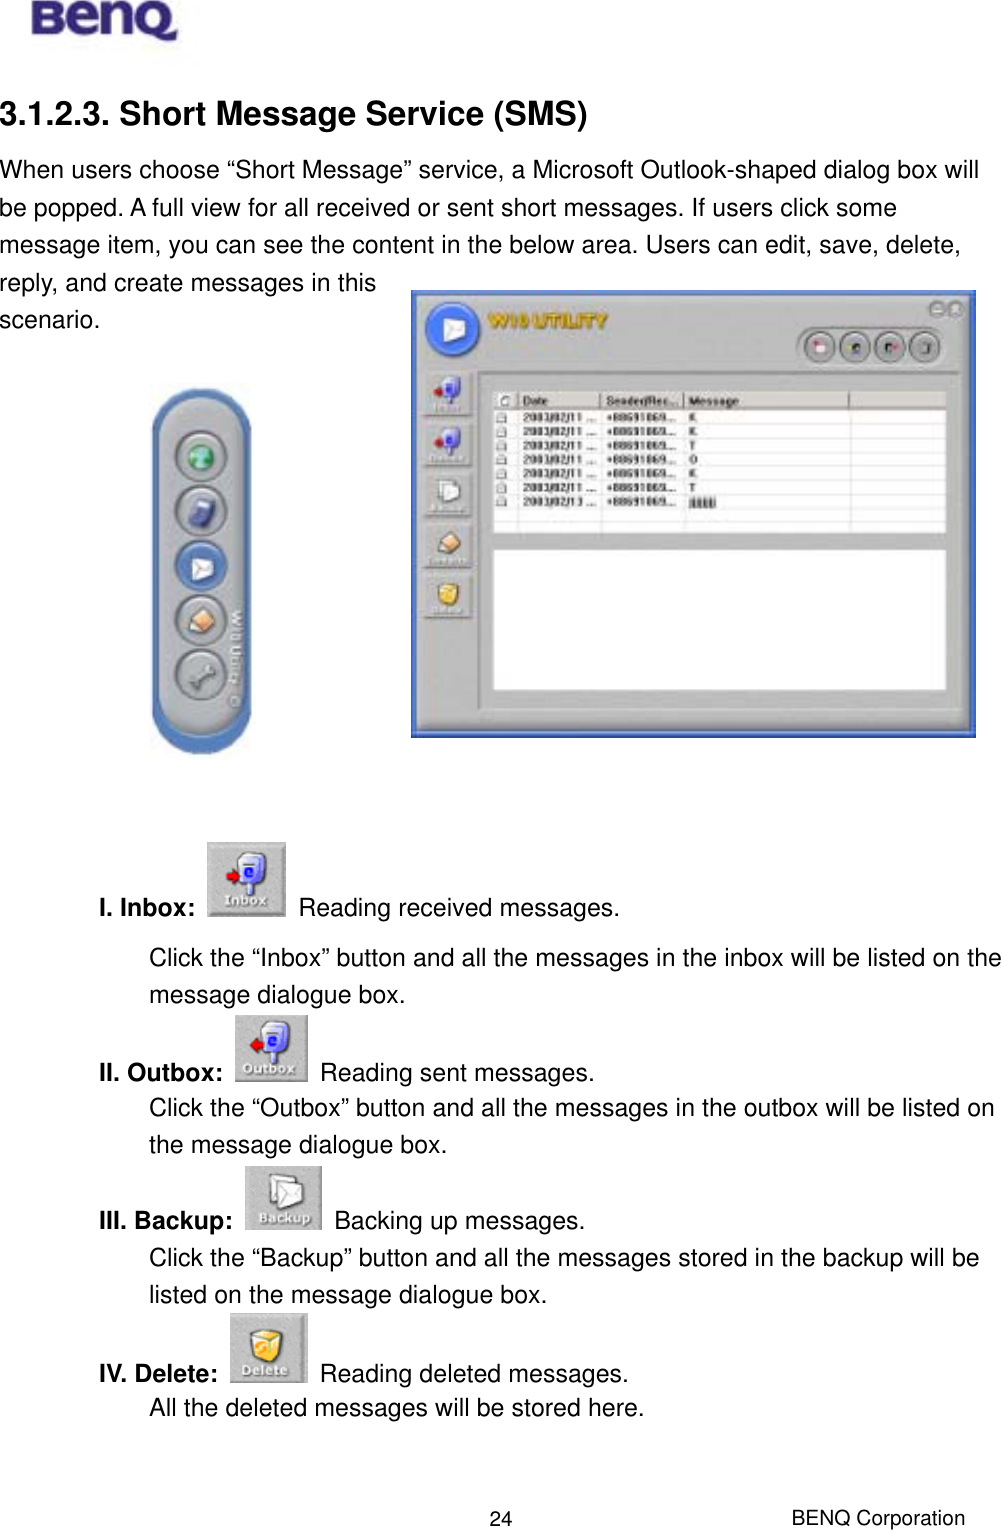  BENQ Corporation 243.1.2.3. Short Message Service (SMS) When users choose “Short Message” service, a Microsoft Outlook-shaped dialog box will be popped. A full view for all received or sent short messages. If users click some message item, you can see the content in the below area. Users can edit, save, delete, reply, and create messages in this scenario.              I. Inbox:    Reading received messages. Click the “Inbox” button and all the messages in the inbox will be listed on the message dialogue box.   II. Outbox:    Reading sent messages. Click the “Outbox” button and all the messages in the outbox will be listed on the message dialogue box. III. Backup:    Backing up messages. Click the “Backup” button and all the messages stored in the backup will be listed on the message dialogue box. IV. Delete:    Reading deleted messages. All the deleted messages will be stored here.   